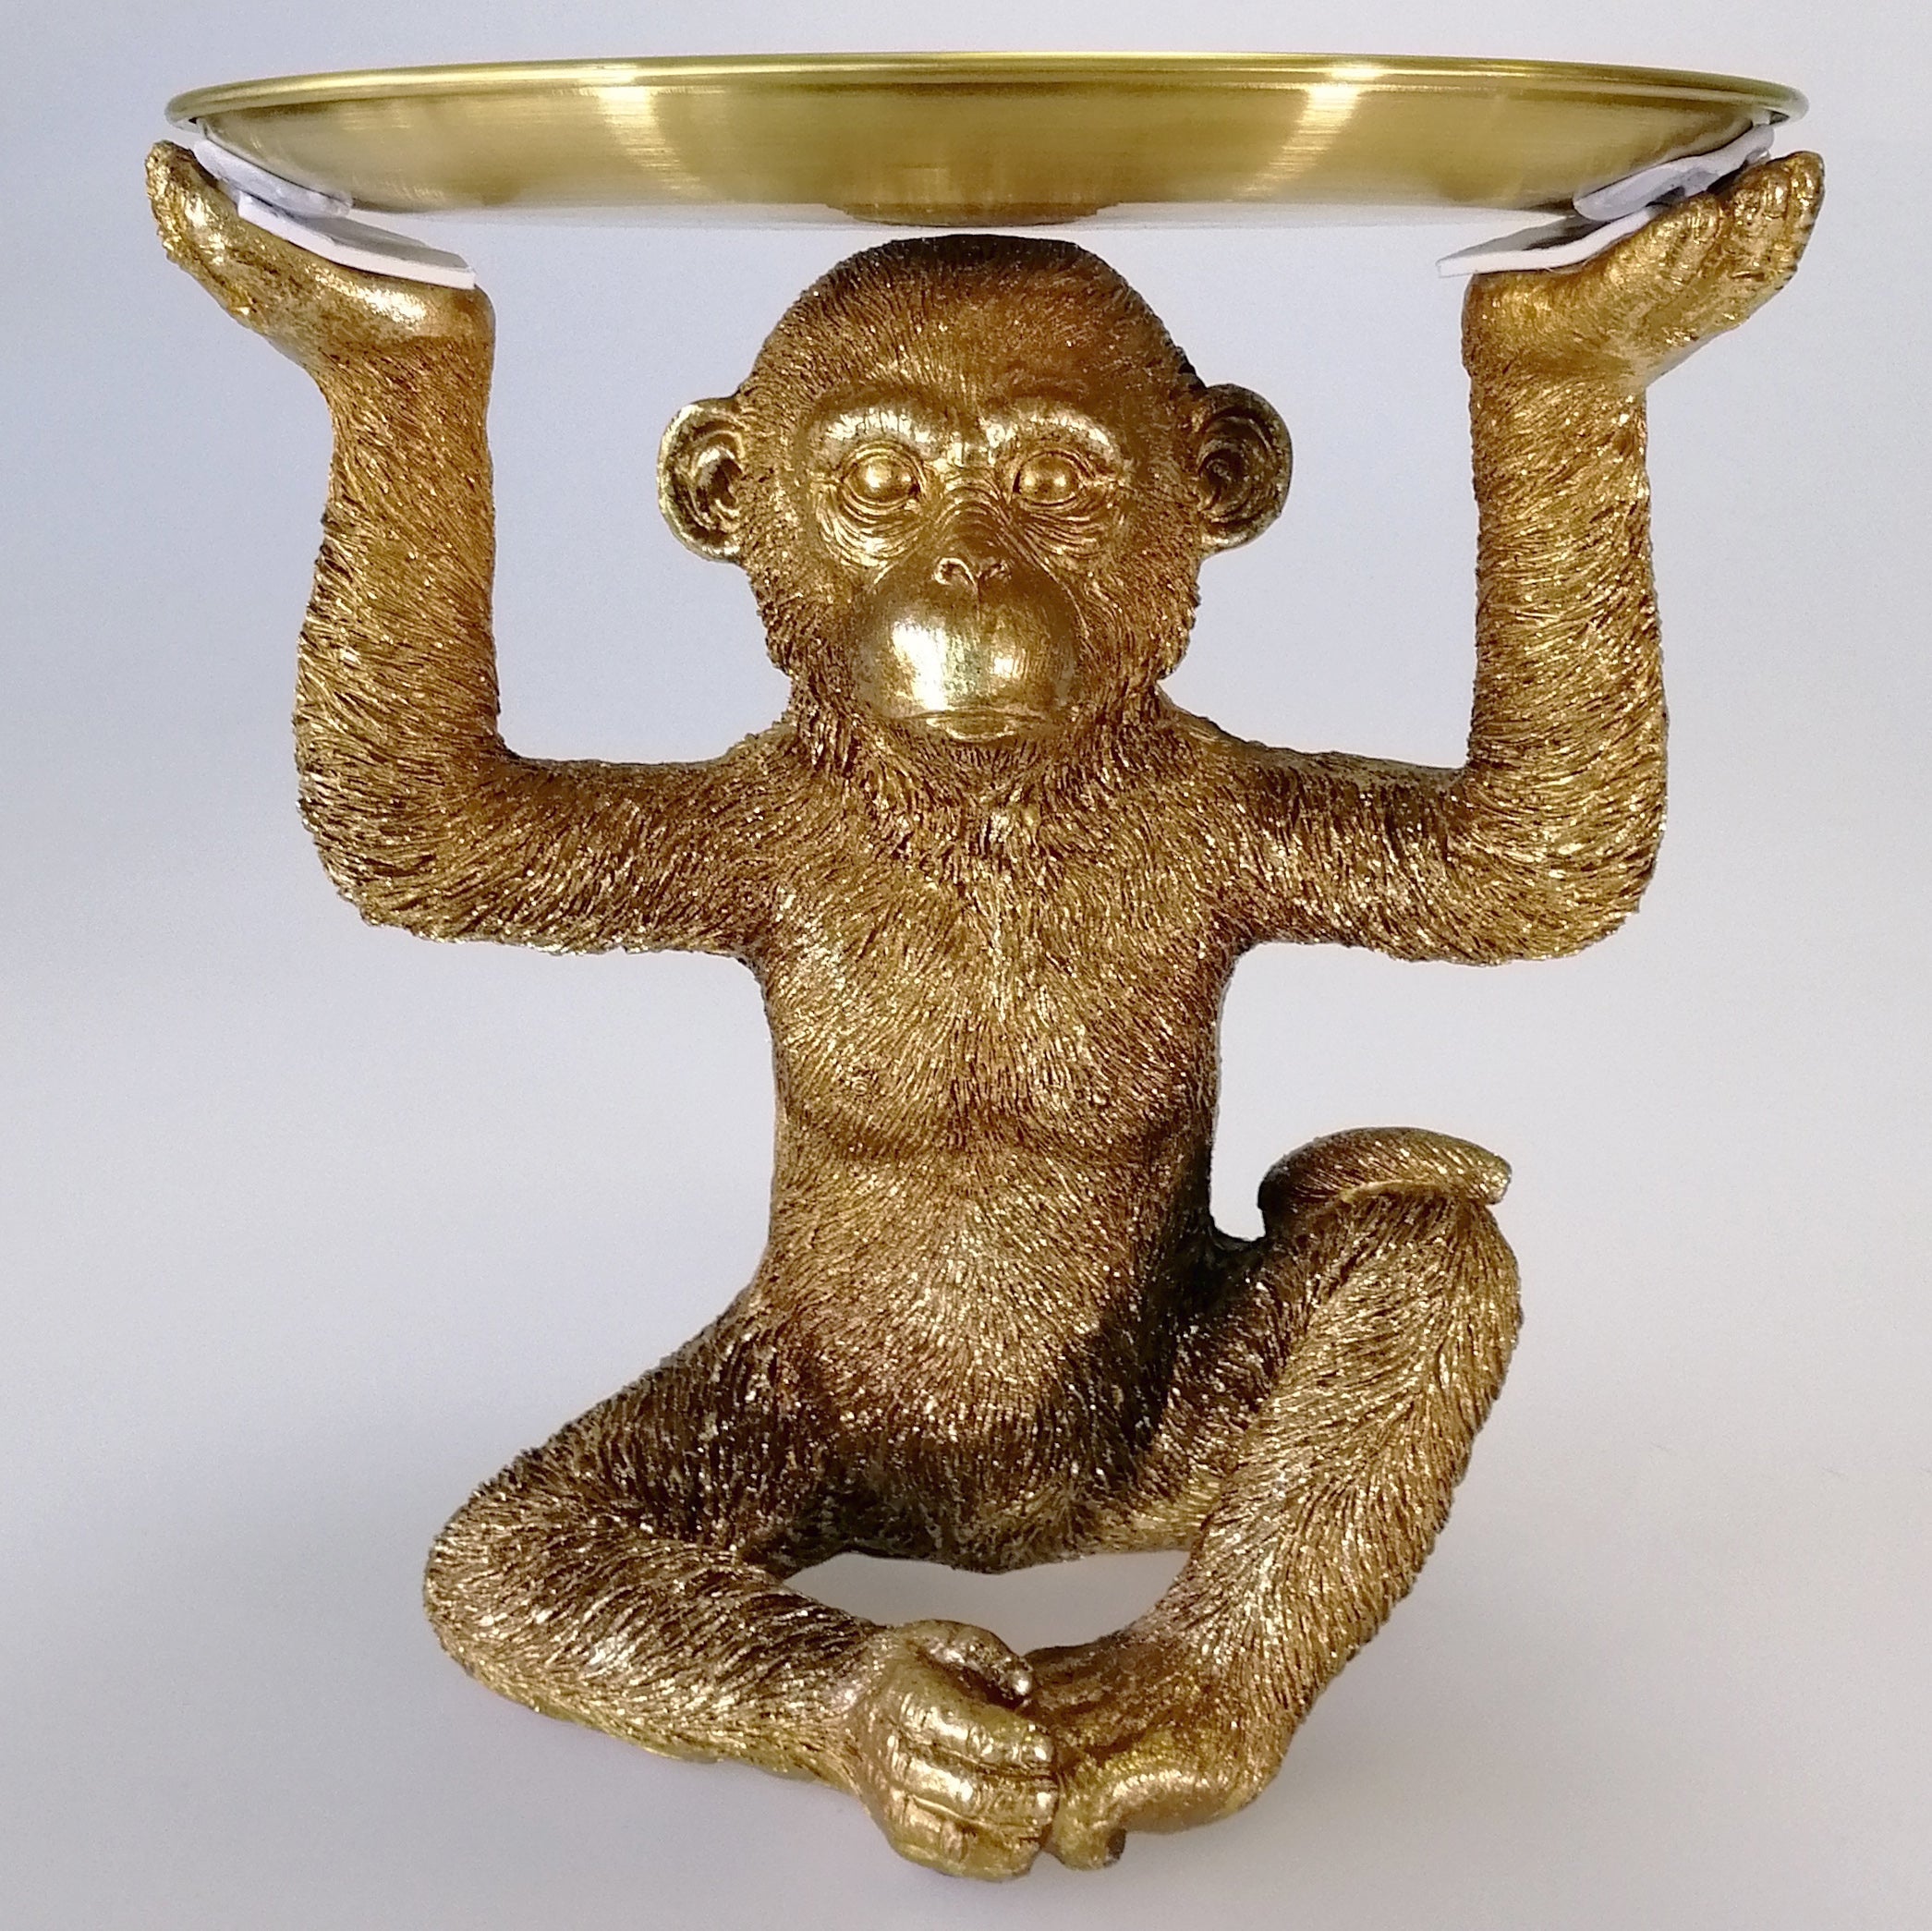 Painted Gold monkeys & Gold Tray